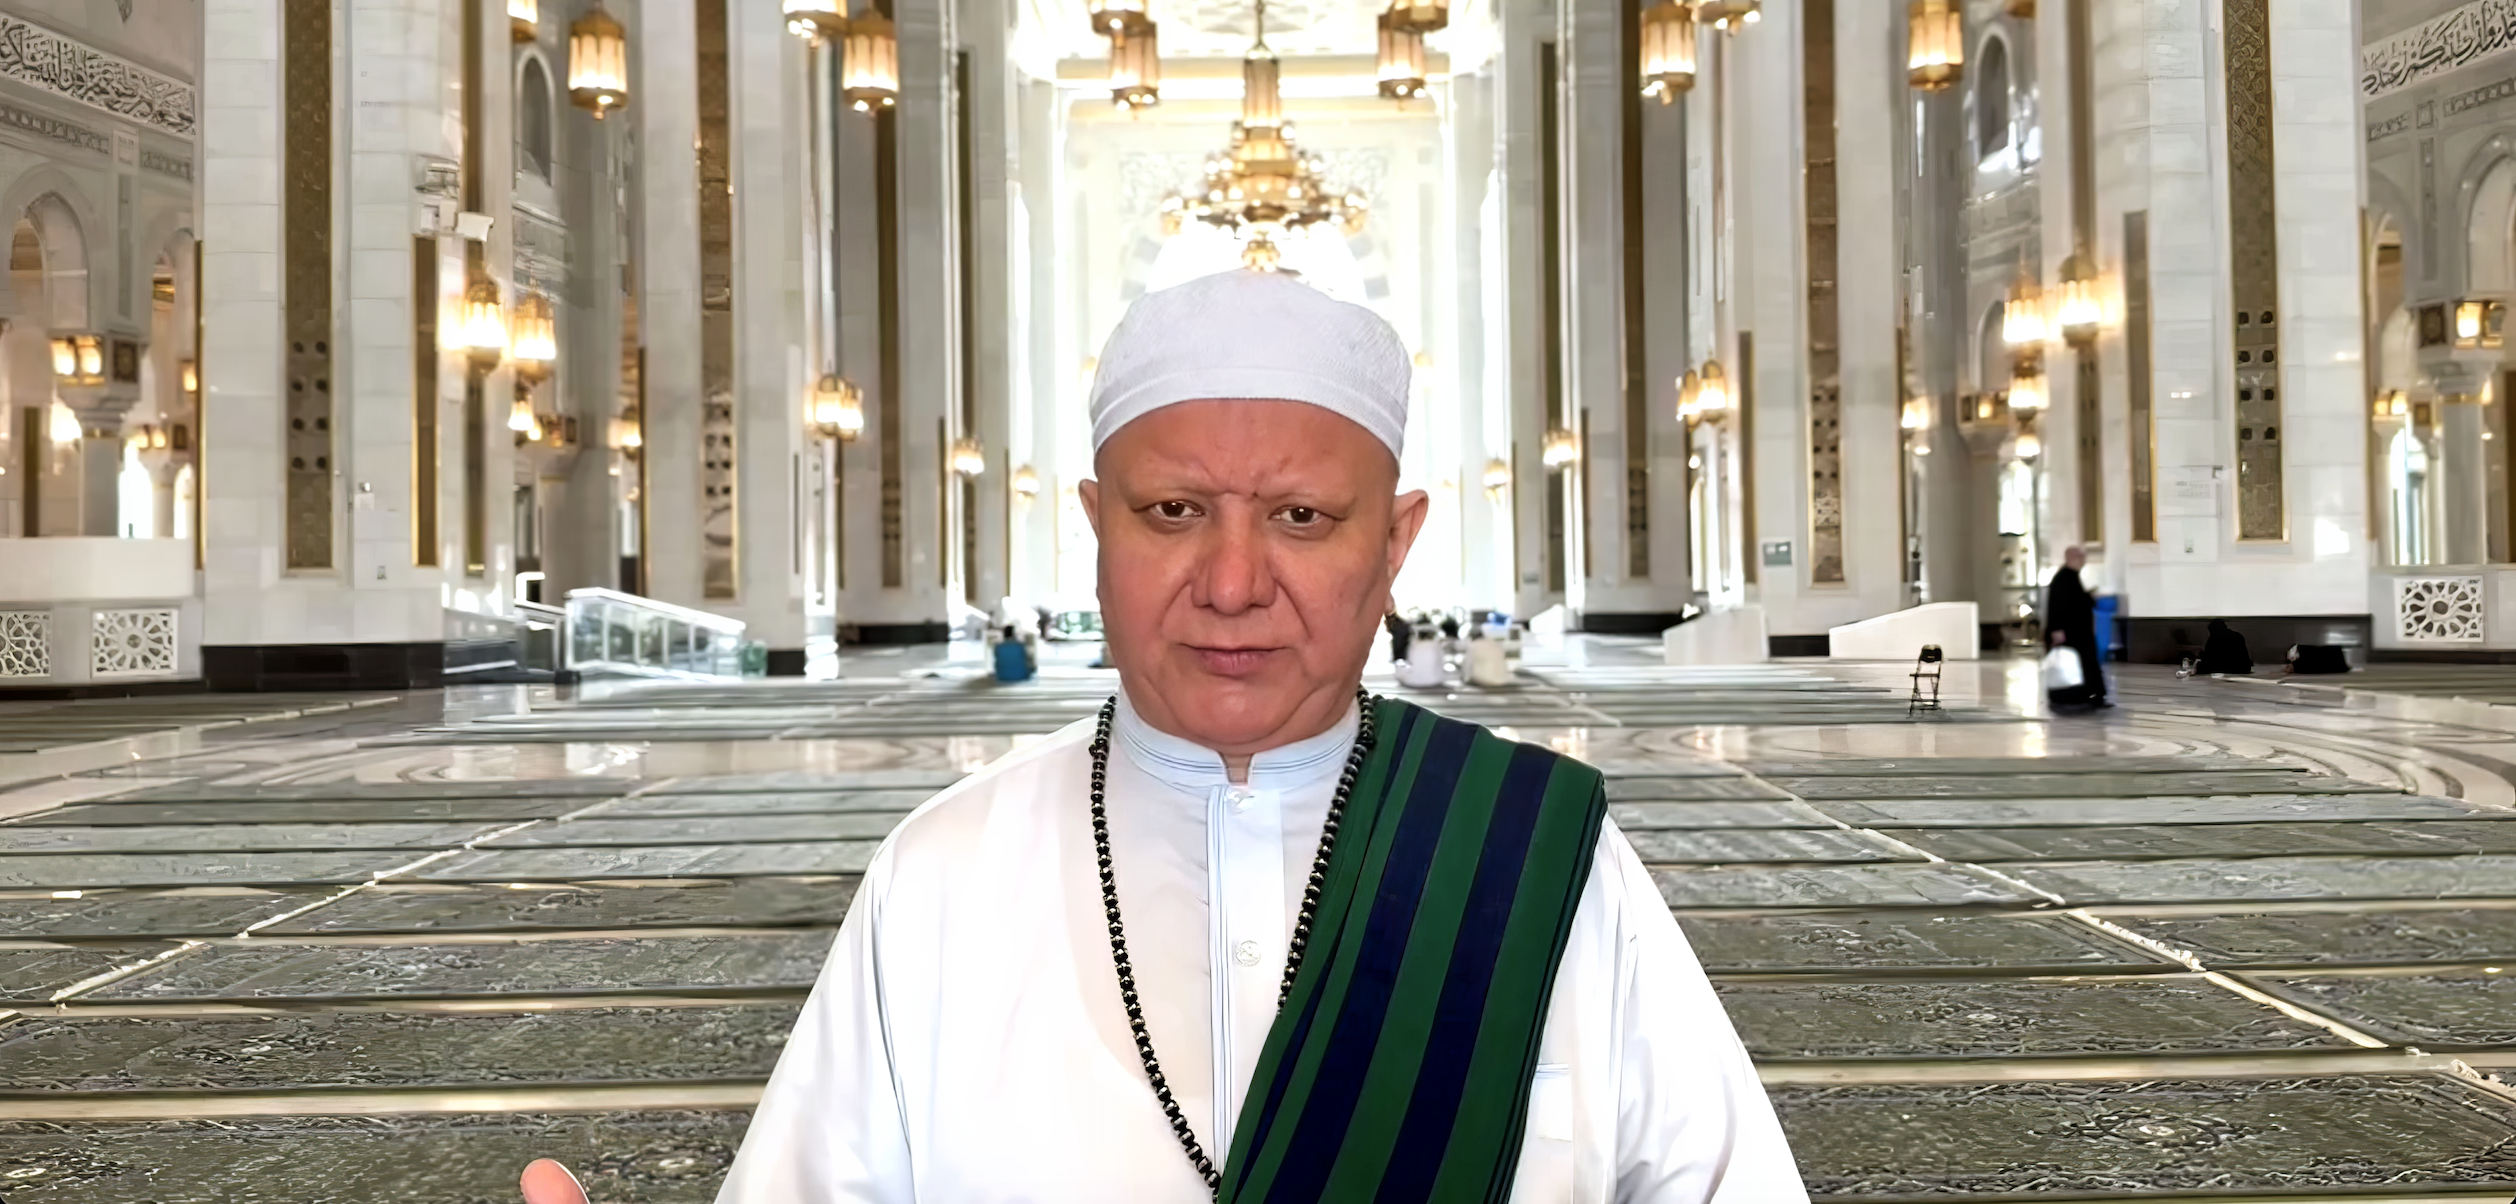 Greetings by Mufti of the Spiritual Assembly of Muslims of Russia Albir Hazrat Krganov on the occasion of the blessed month of Ramadan